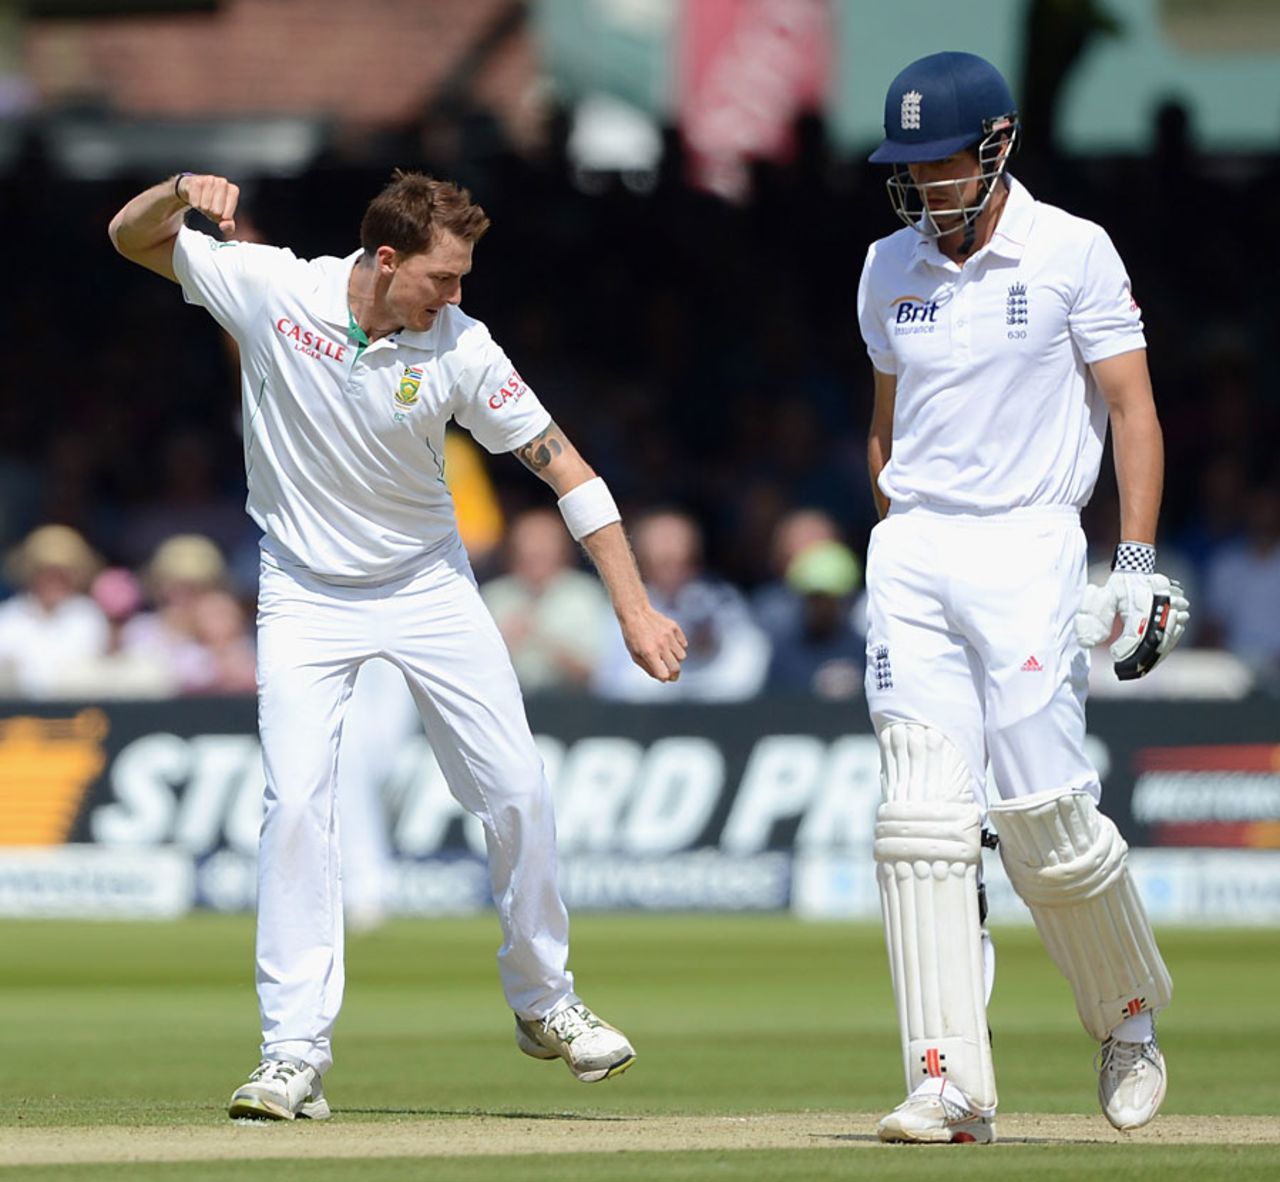 Dale Steyn is pumped as he removes Alastair Cook, England v South Africa, 3rd Investec Test, Lord's, 2nd day, August 17, 2012